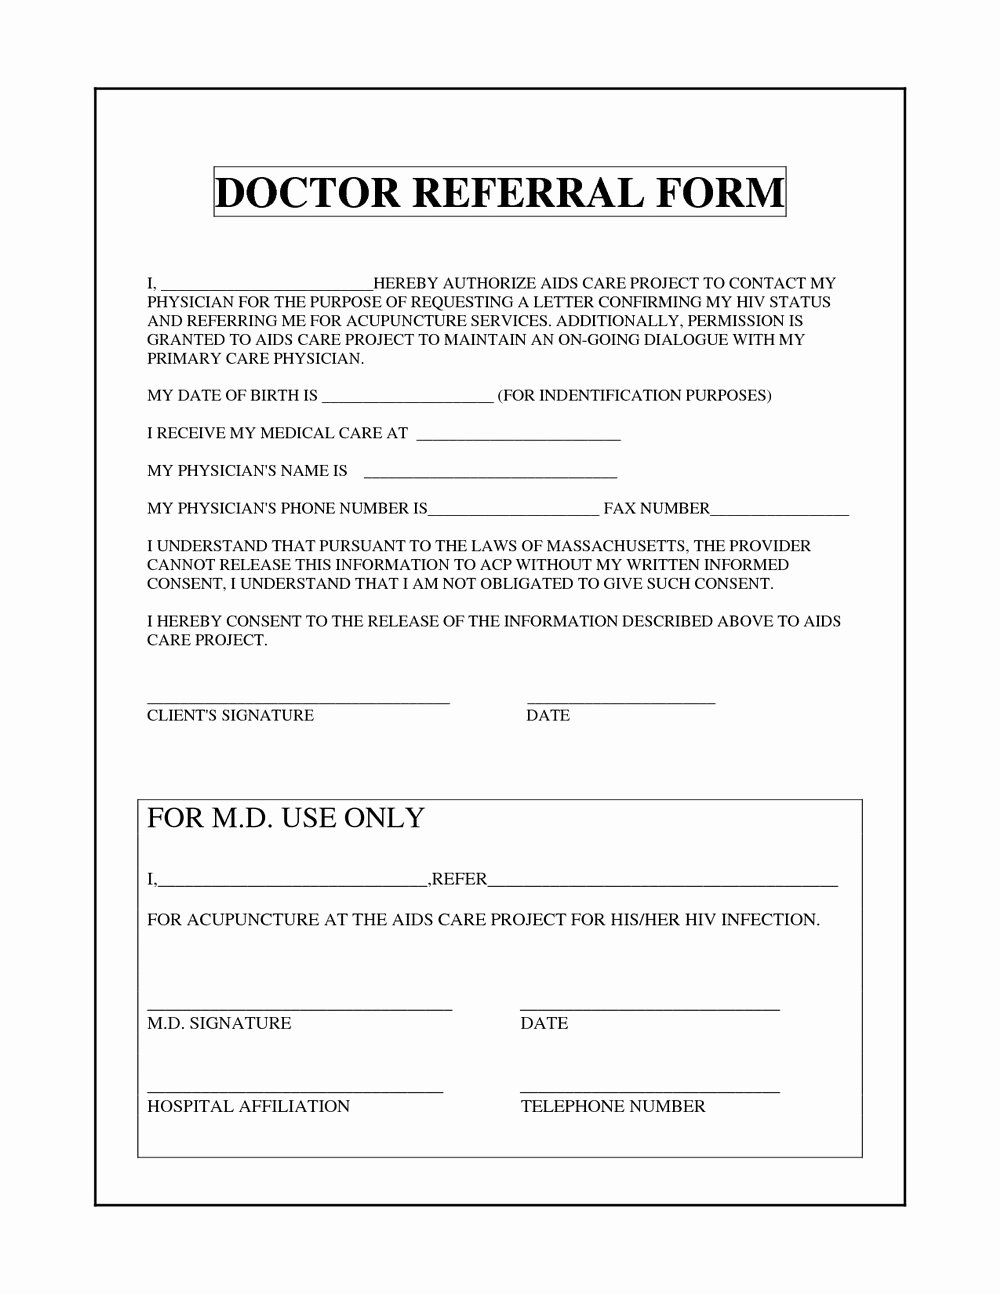 Doctor Referral form Template Awesome United Healthcare Primary Care Physician Referral form